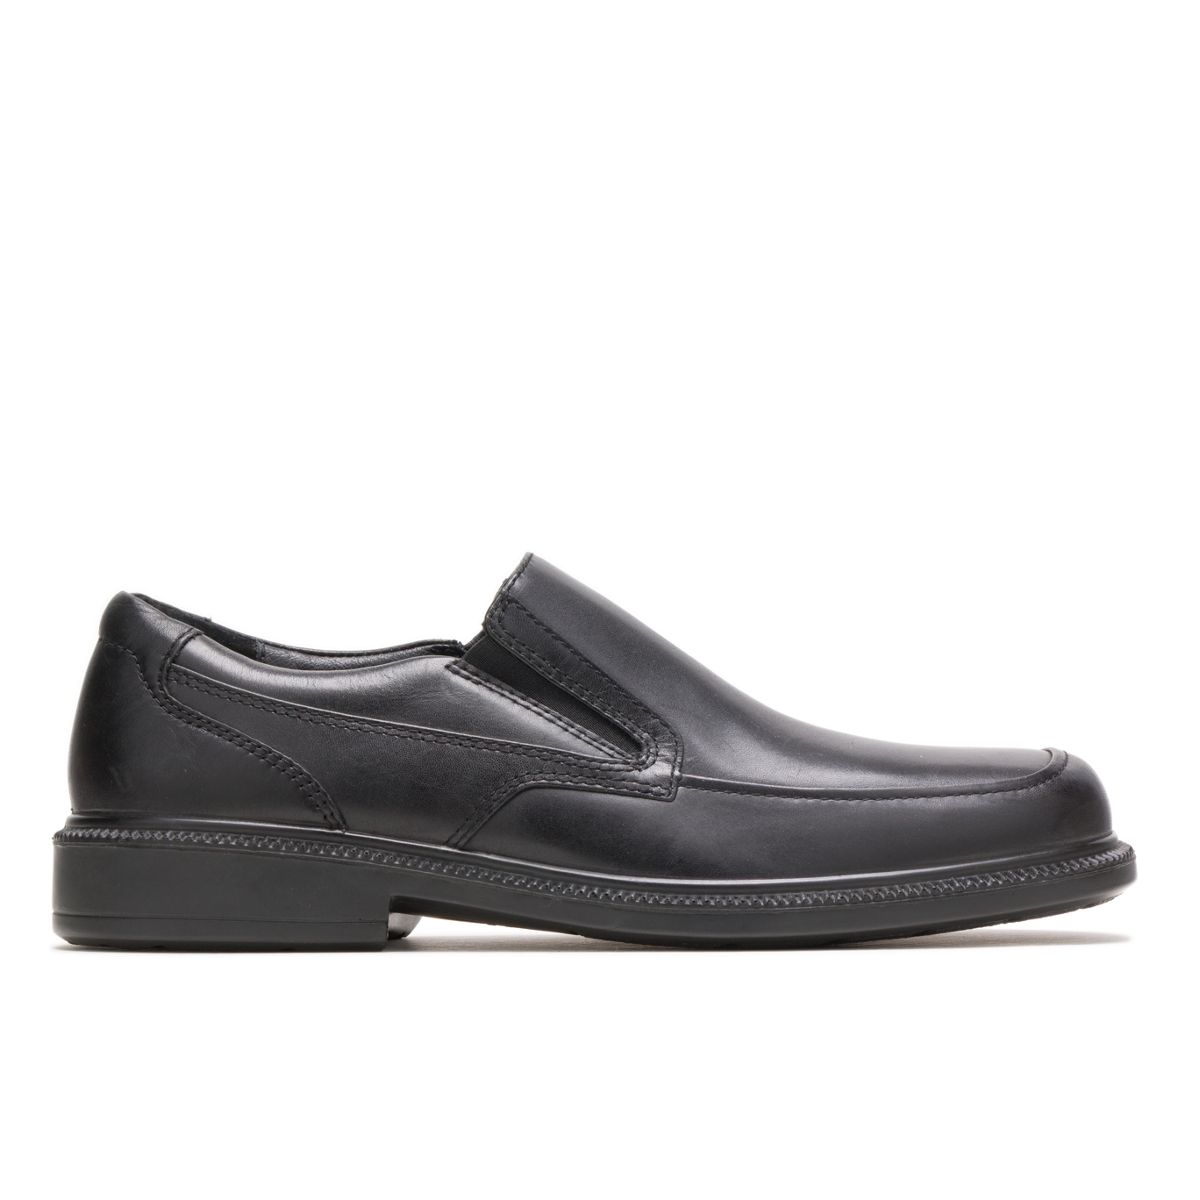 hush puppies slip on leather shoes